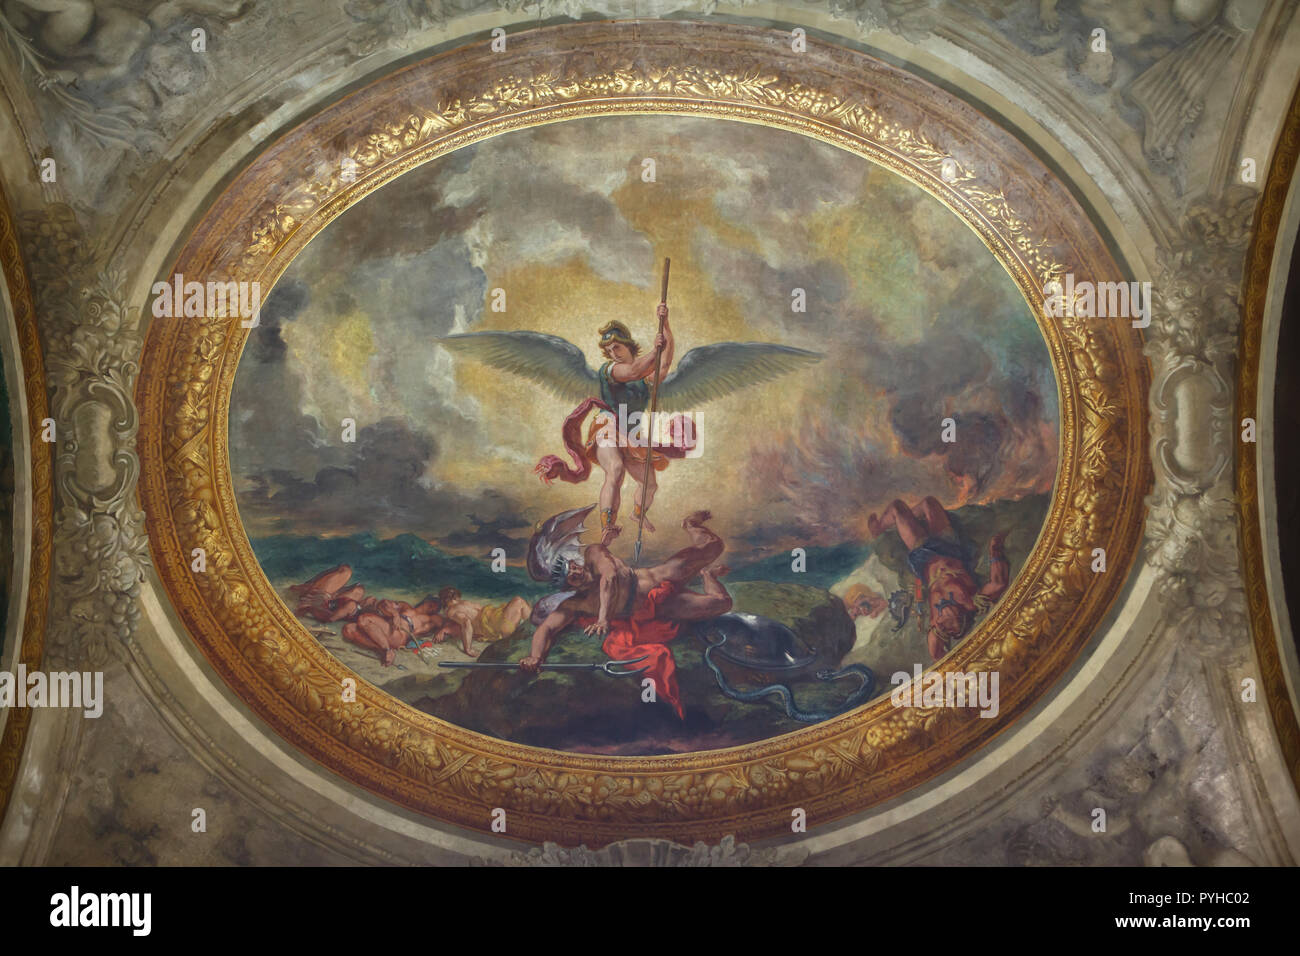 Archangel Michael vanquishing the Devil. Mural ceiling painting by French Romantic painter Eugène Delacroix (1855–1861) in the Chapel of the Holy Angels in the Church of Saint-Sulpice (Église Saint-Sulpice) in Paris, France. Stock Photo